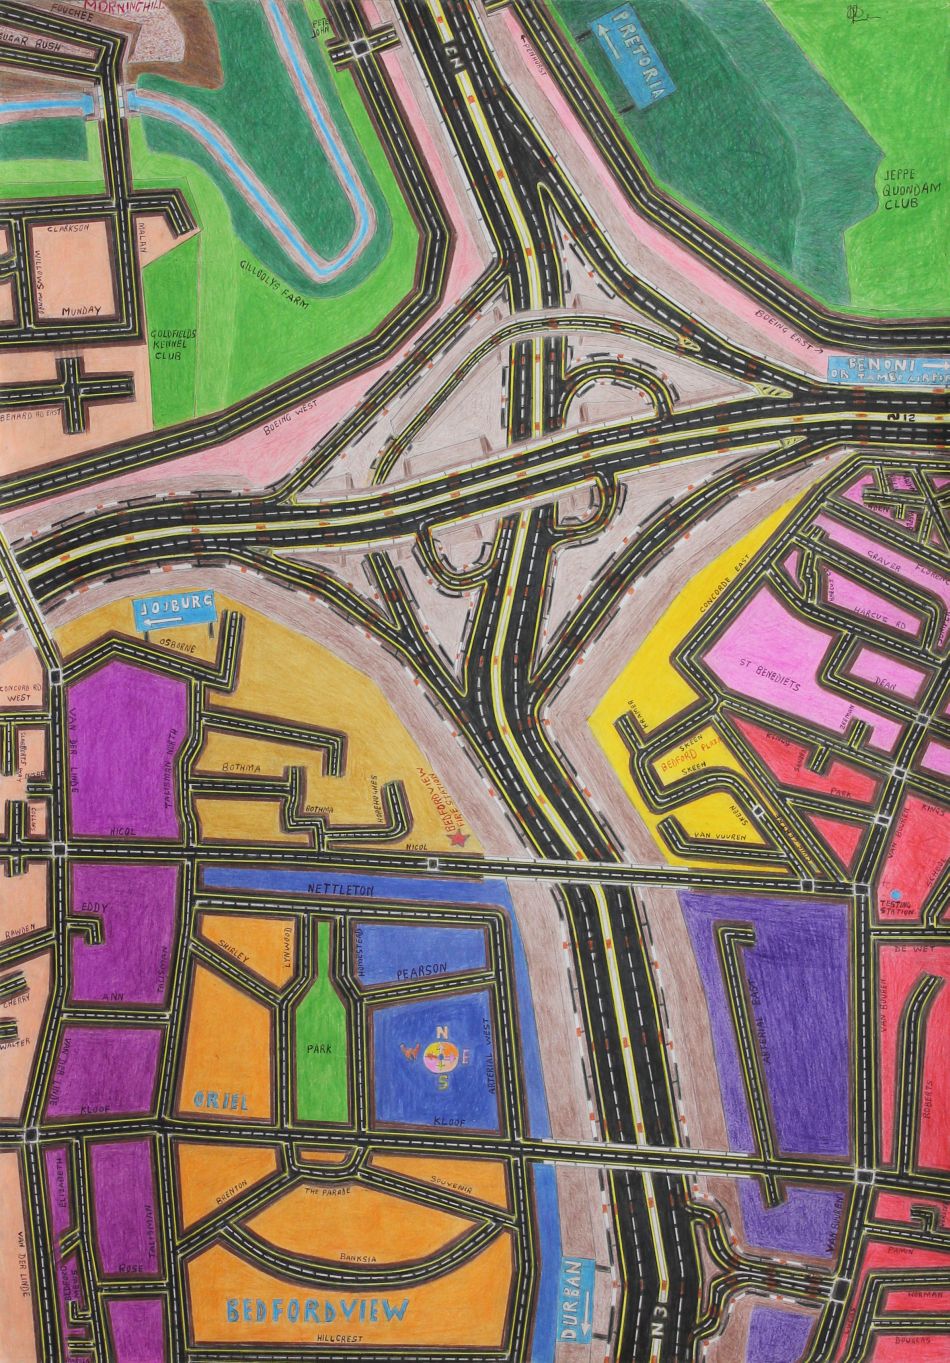 Click the image for a view of: Untitled (Bedfordview). 2013. Colour pencil on paper. 860X710mm